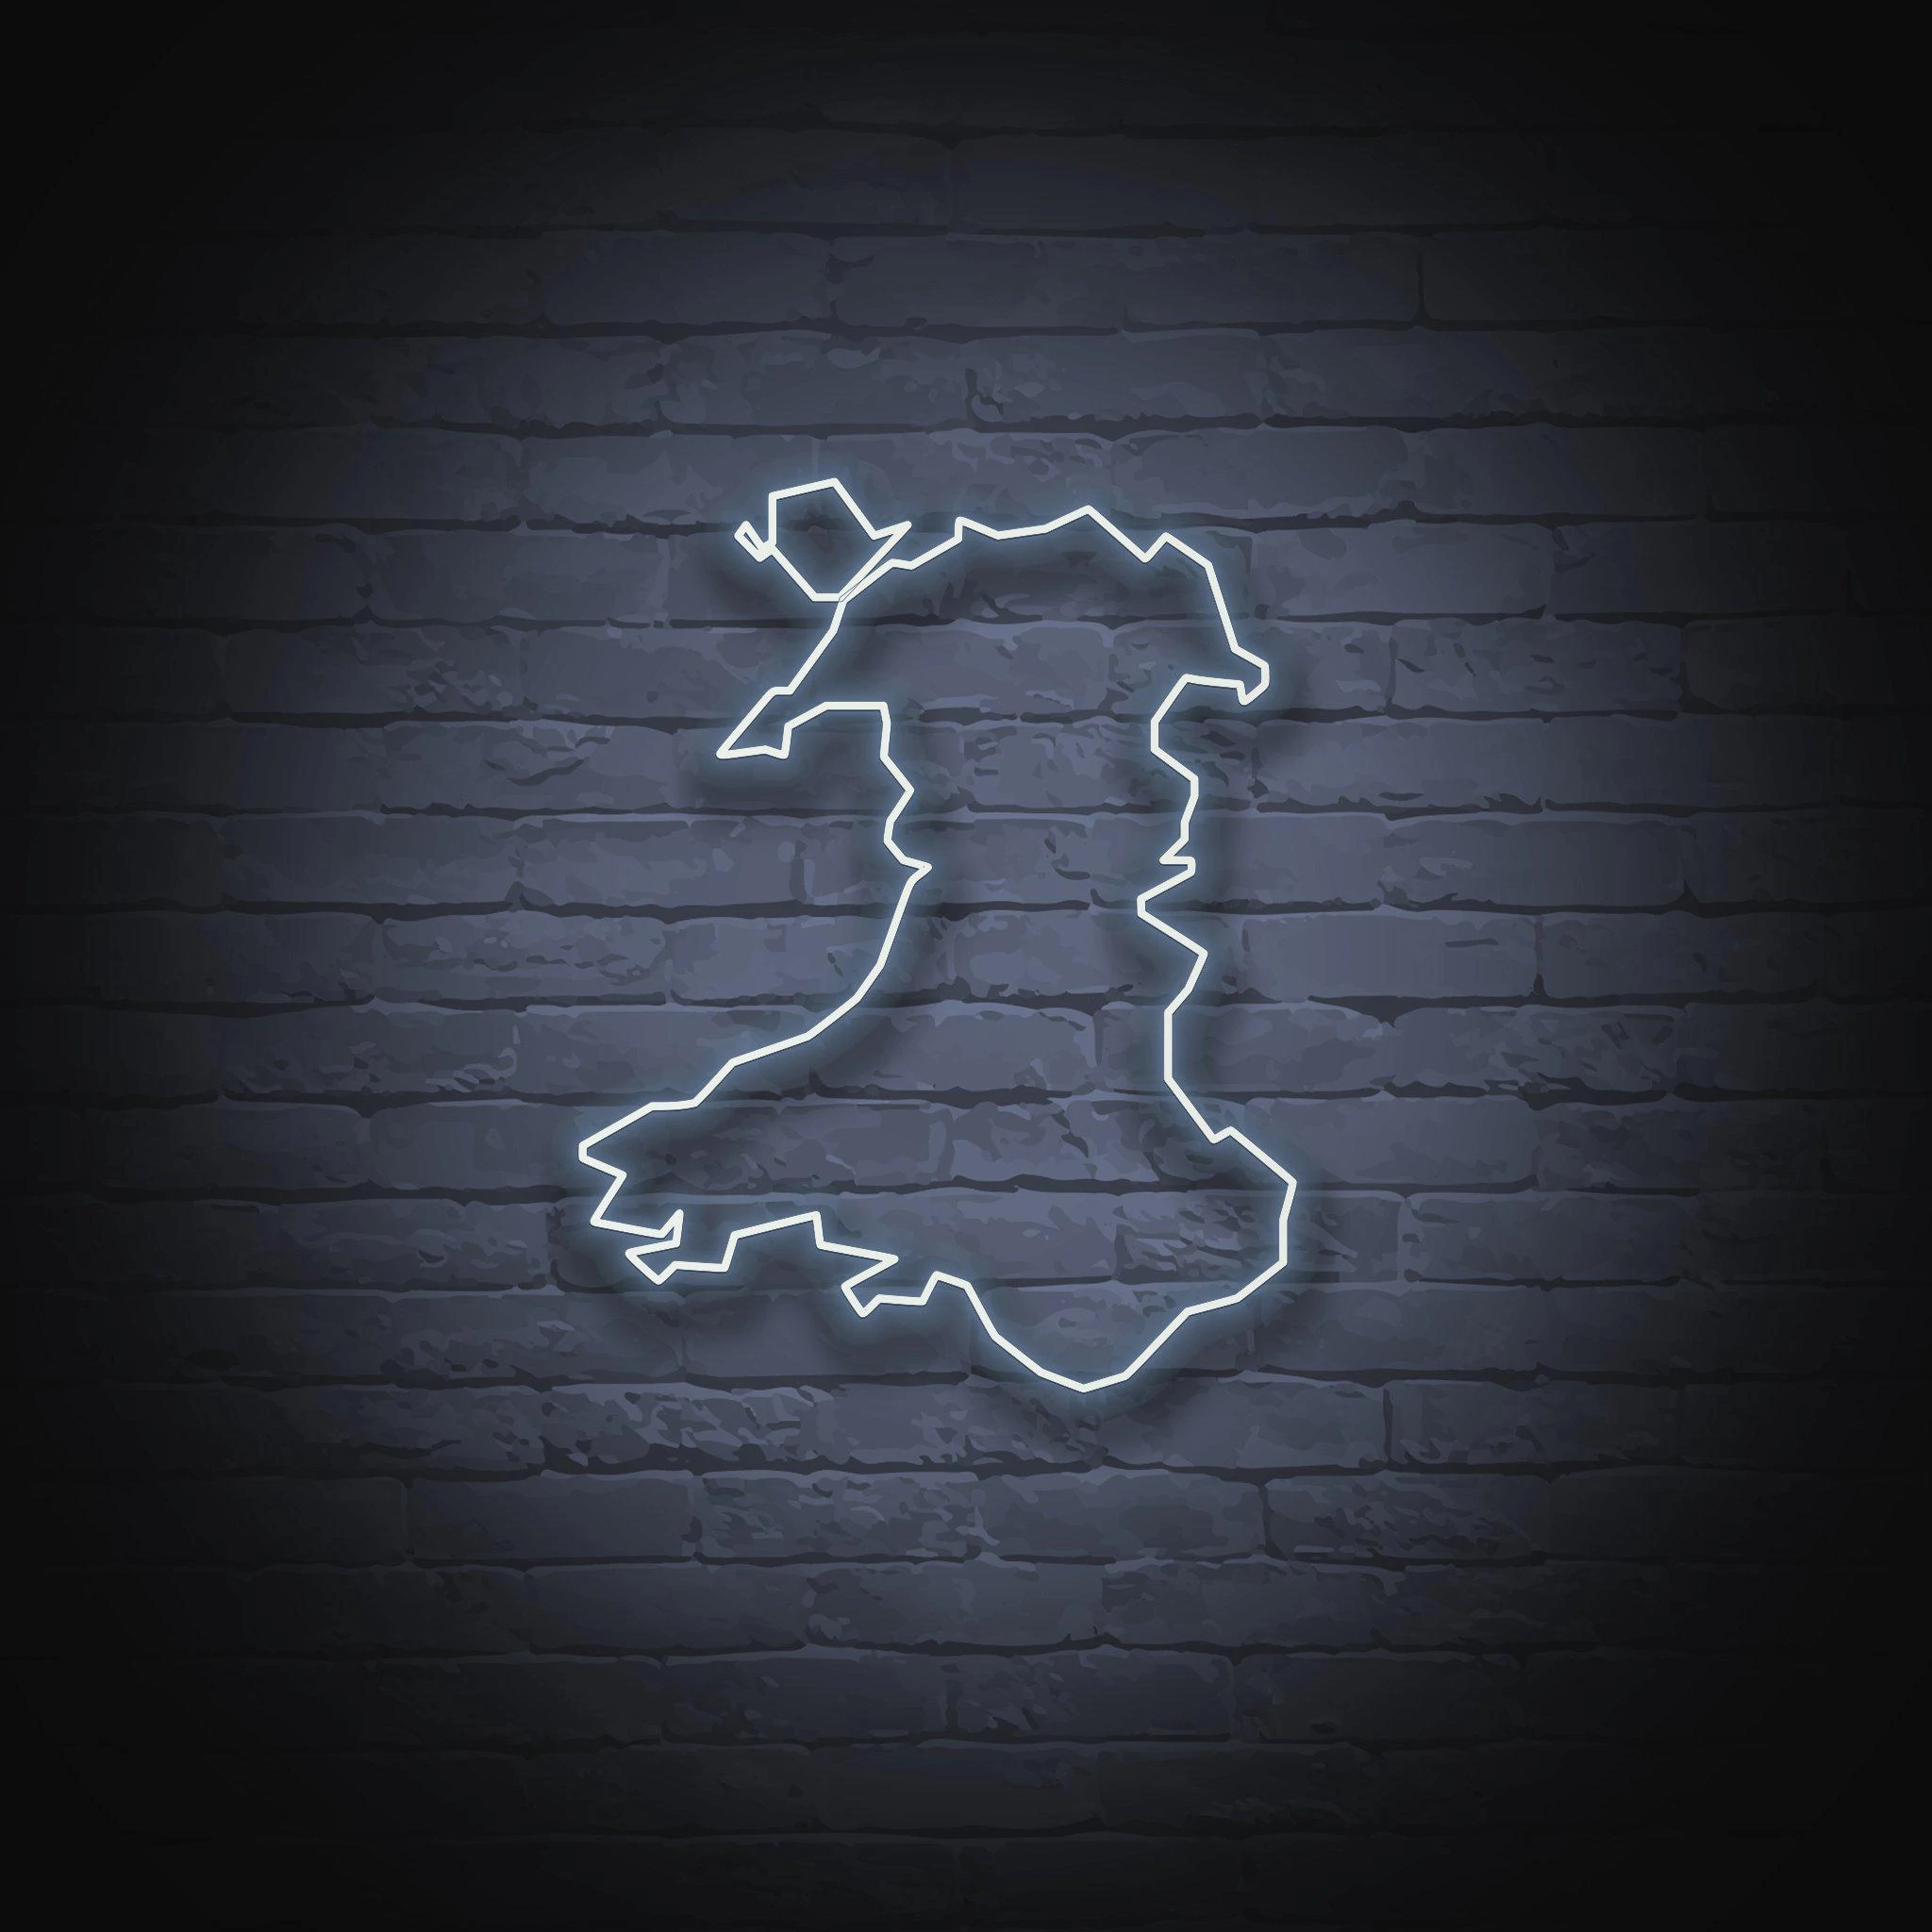 'WALES' NEON SIGN - NeonFerry